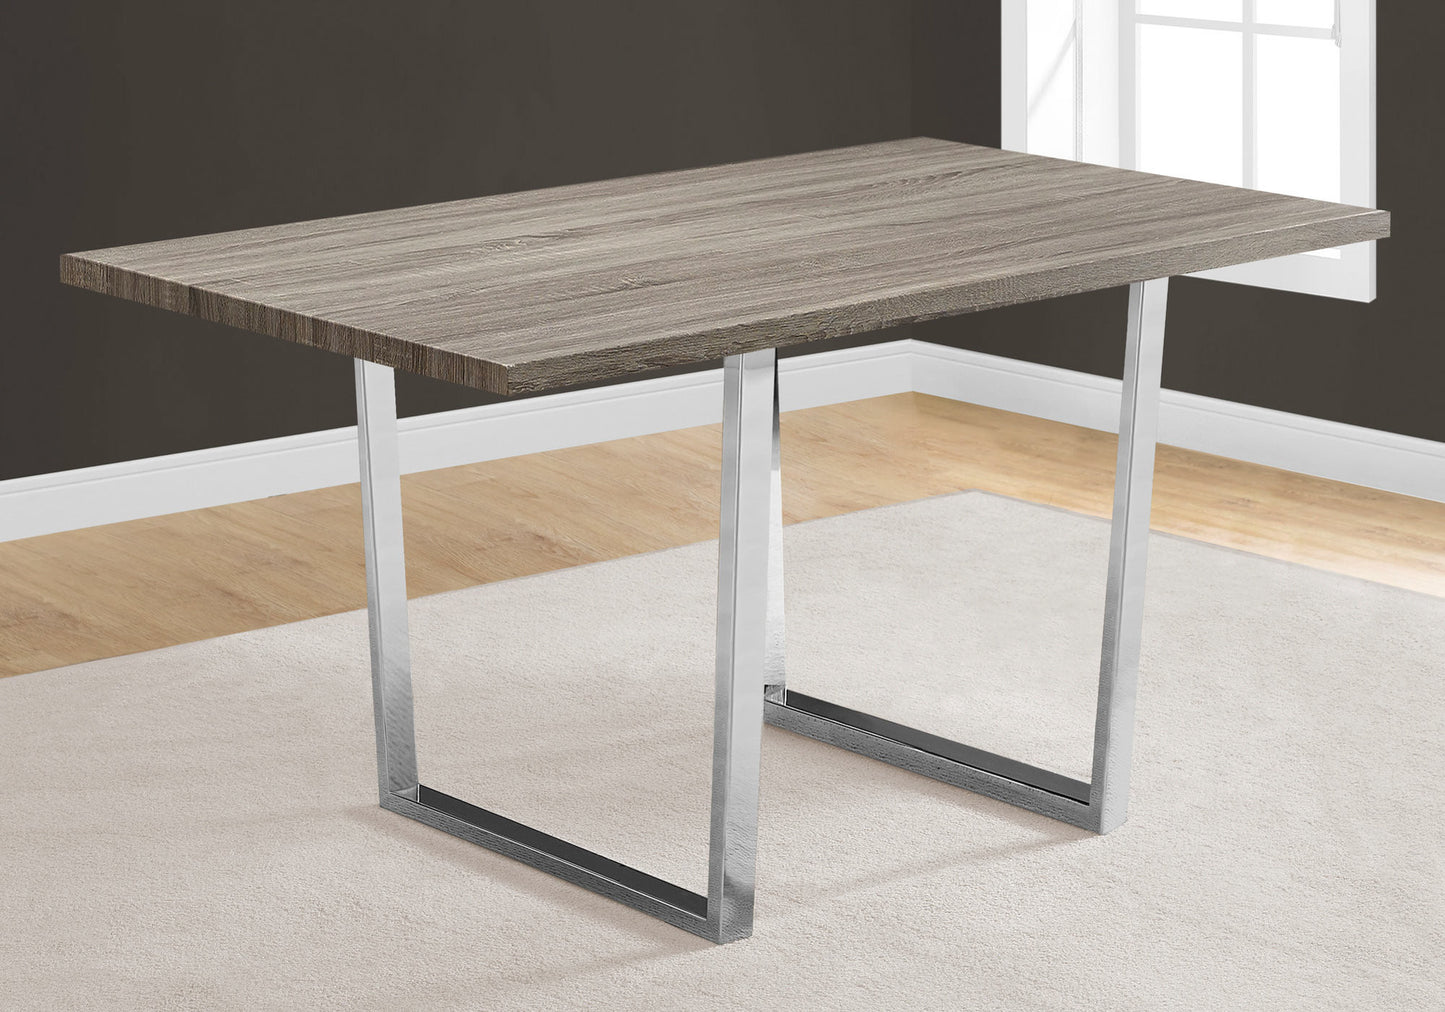 59" Taupe And Silver Metal Dining Table